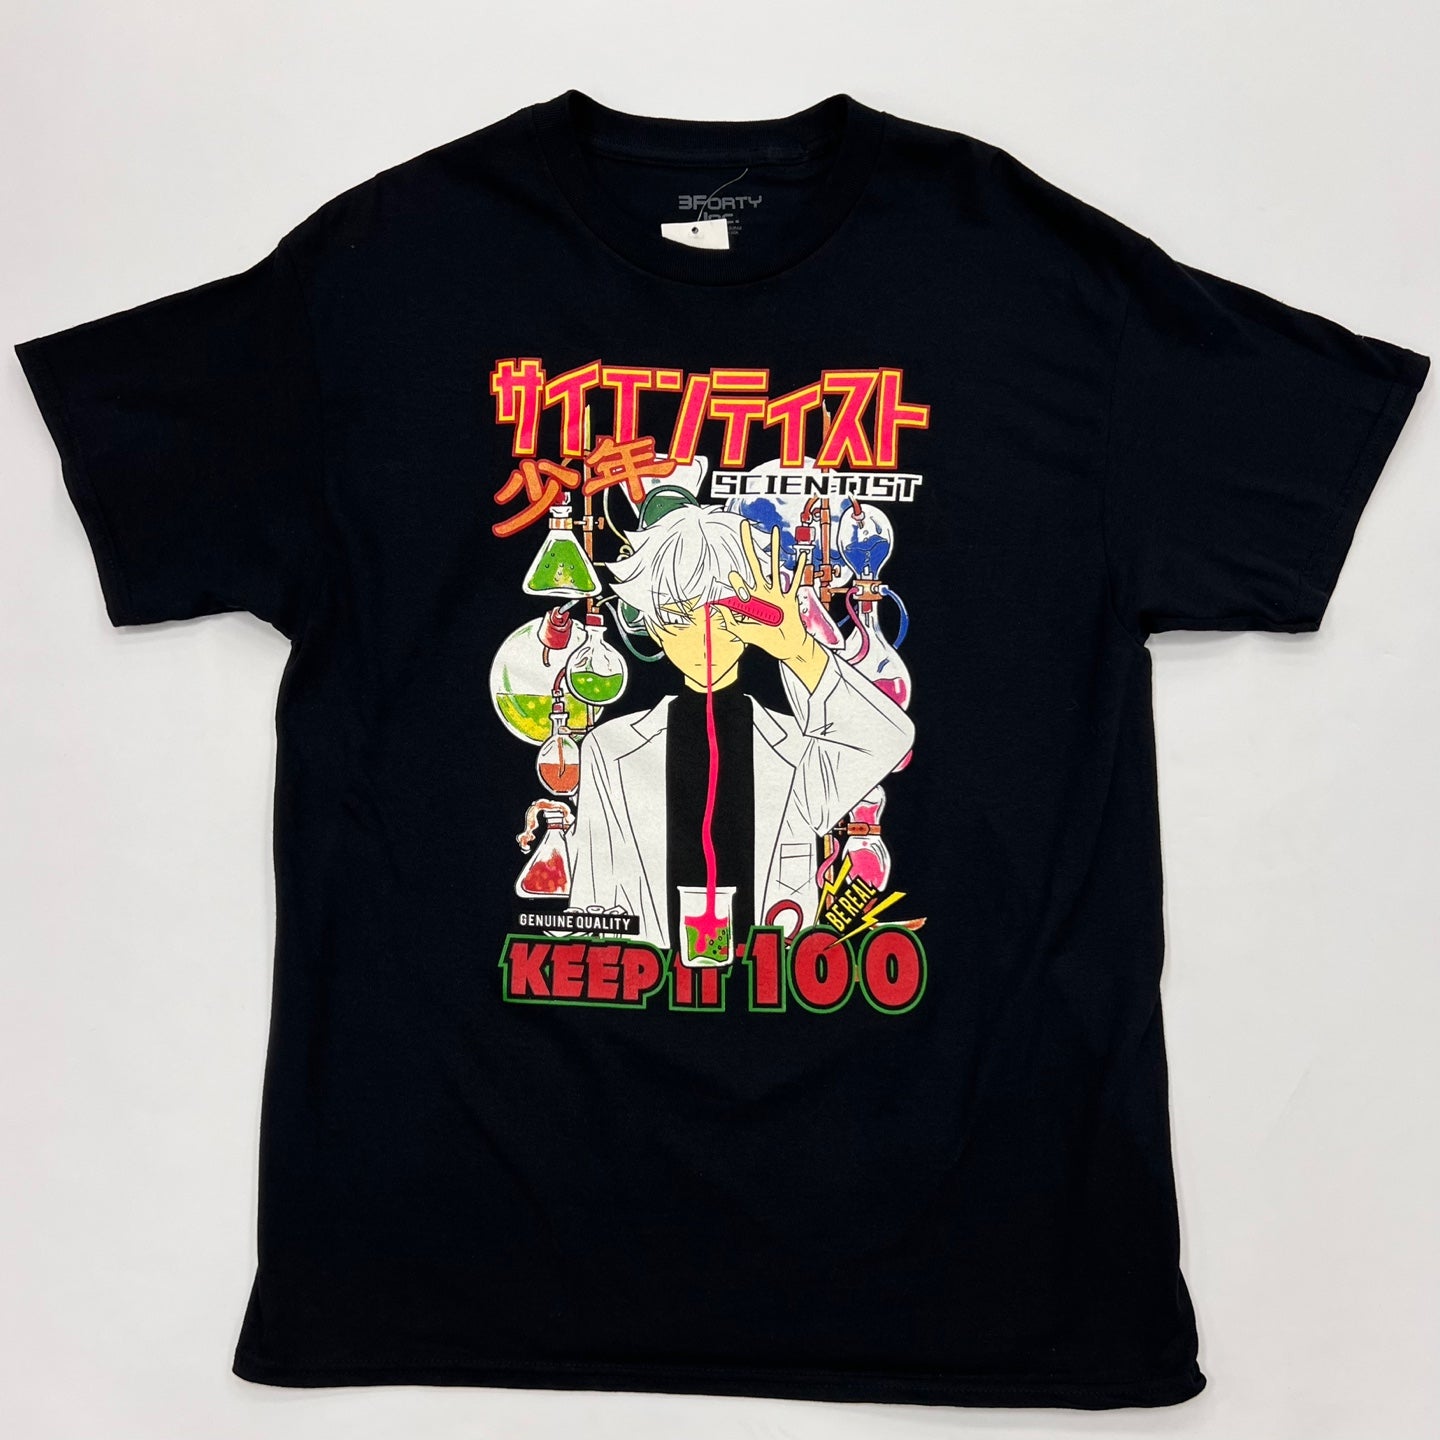 3FORTY Keep it Graphic T-Shirt